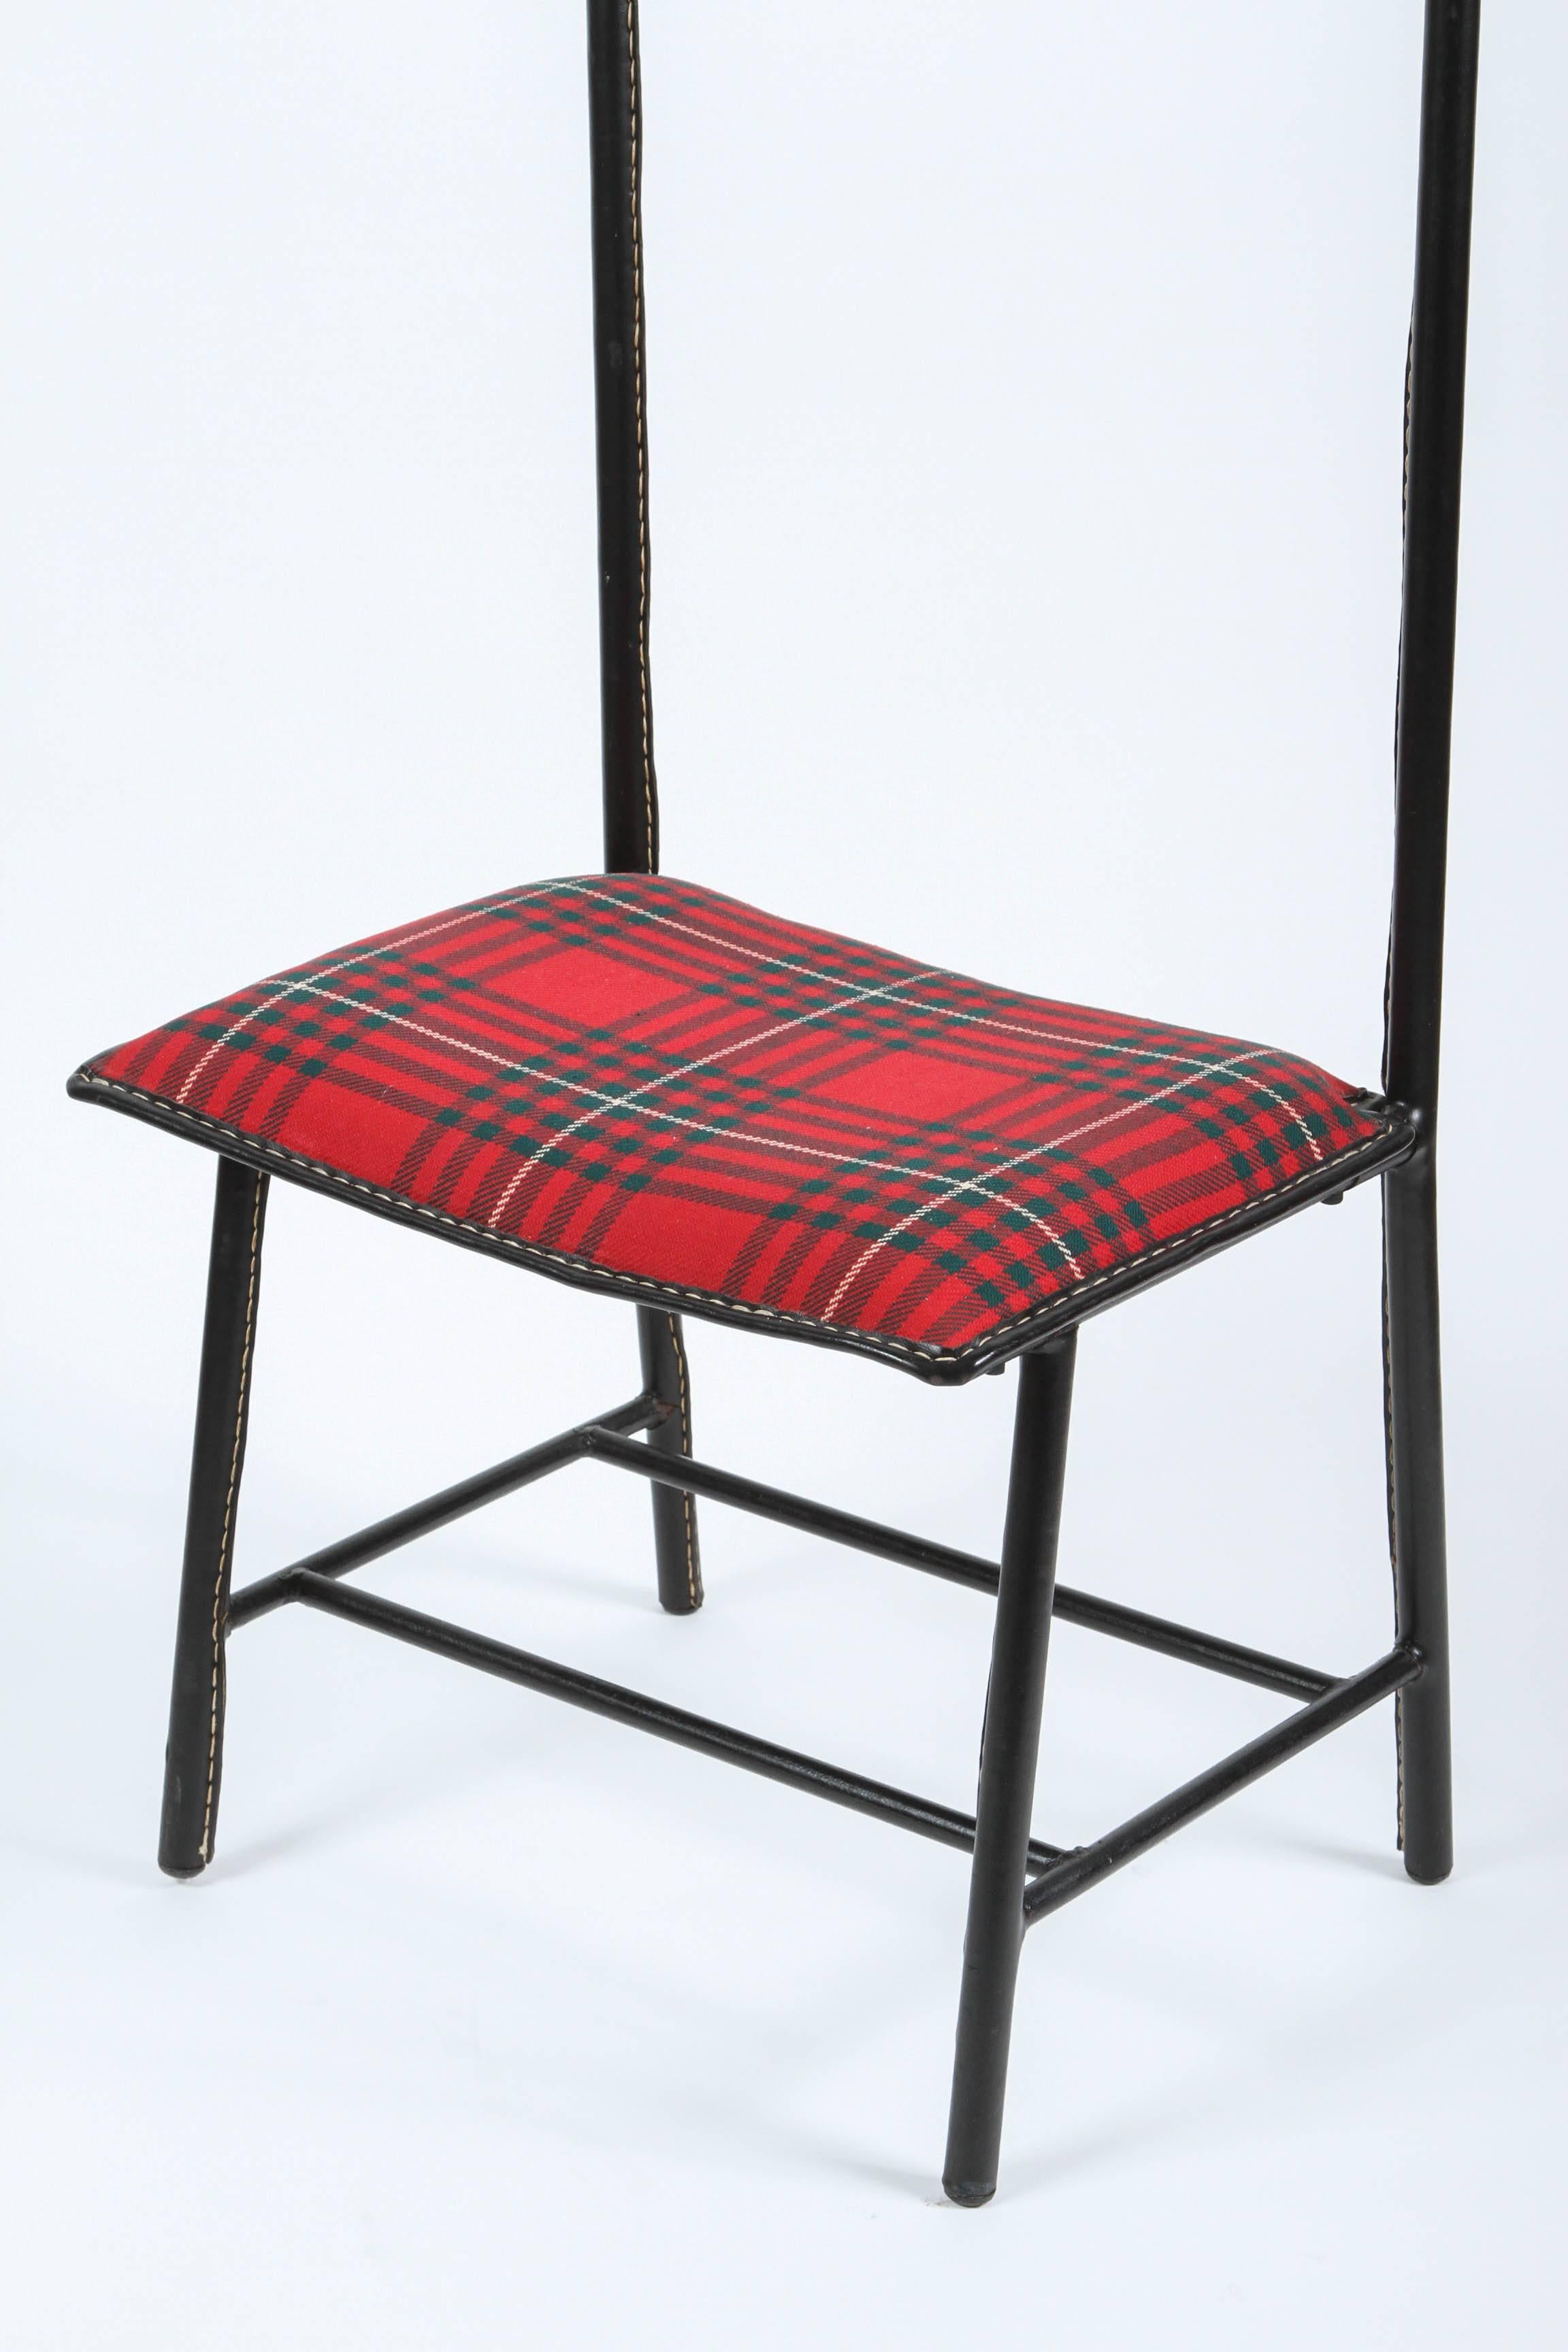 Rare and handsome Jacques Adnet valet de nuit  and seat with leather wrapped hand-stitched in Hermes saddle style and original tartan plaid wool upholstery.
Jacques Adnet valet de nuit by La Compagnie des Arts,
Circa 1960 France.
Iron frame wrapped